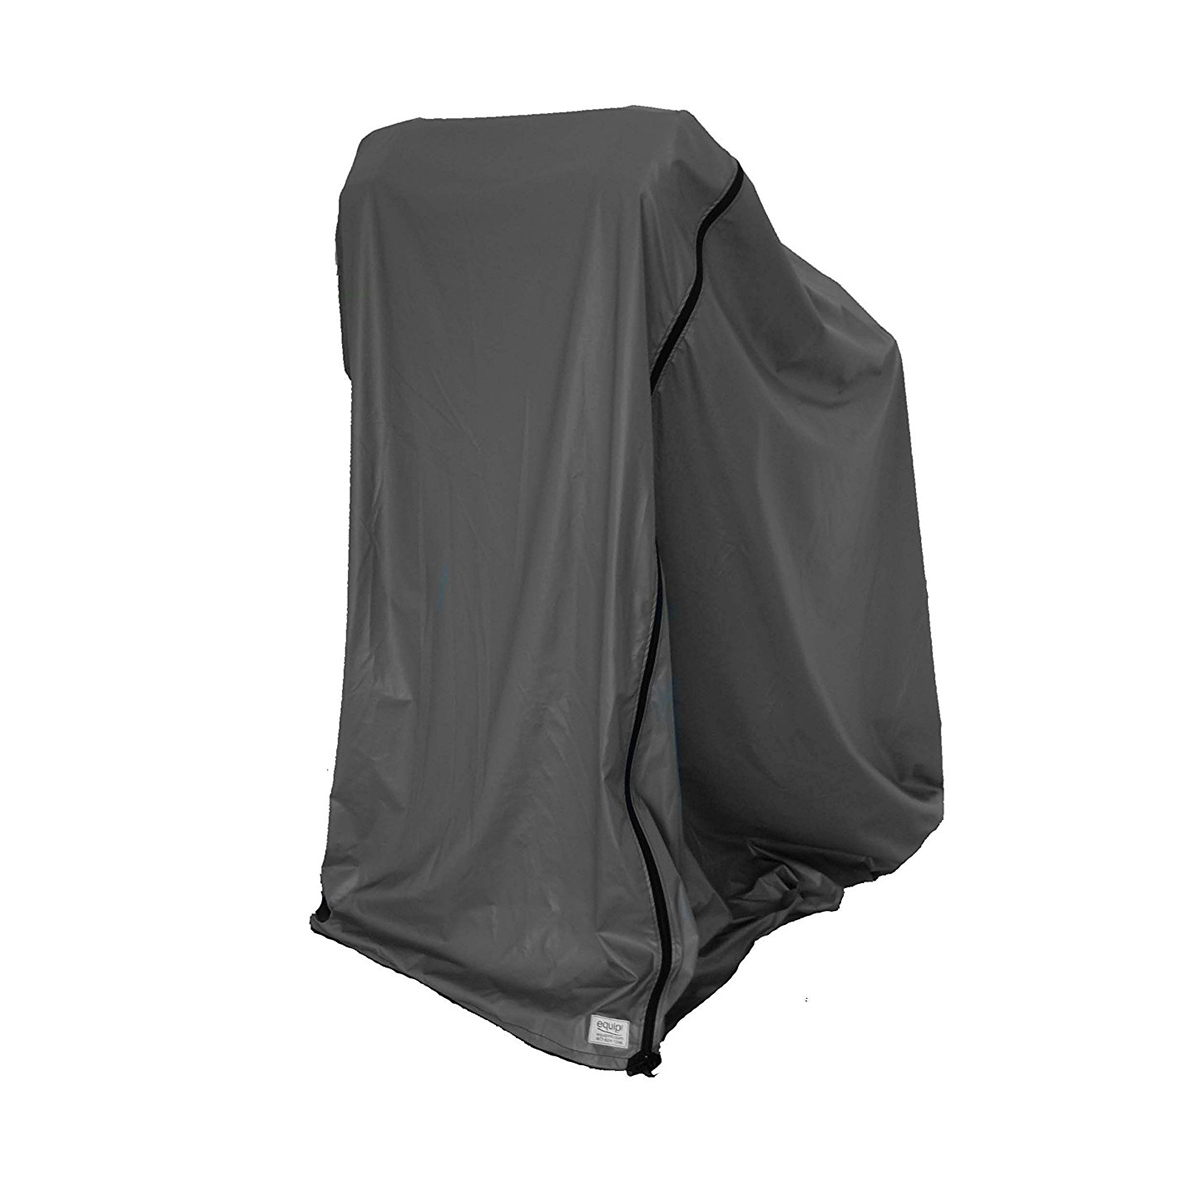 Treadmill Cover Mayhour Waterproof Non-Folding Running Machine Cover Dstproof Fitness Equiment All Weather Protective with Zipper and Drawstring Indoor Outdoor Home Office Use 